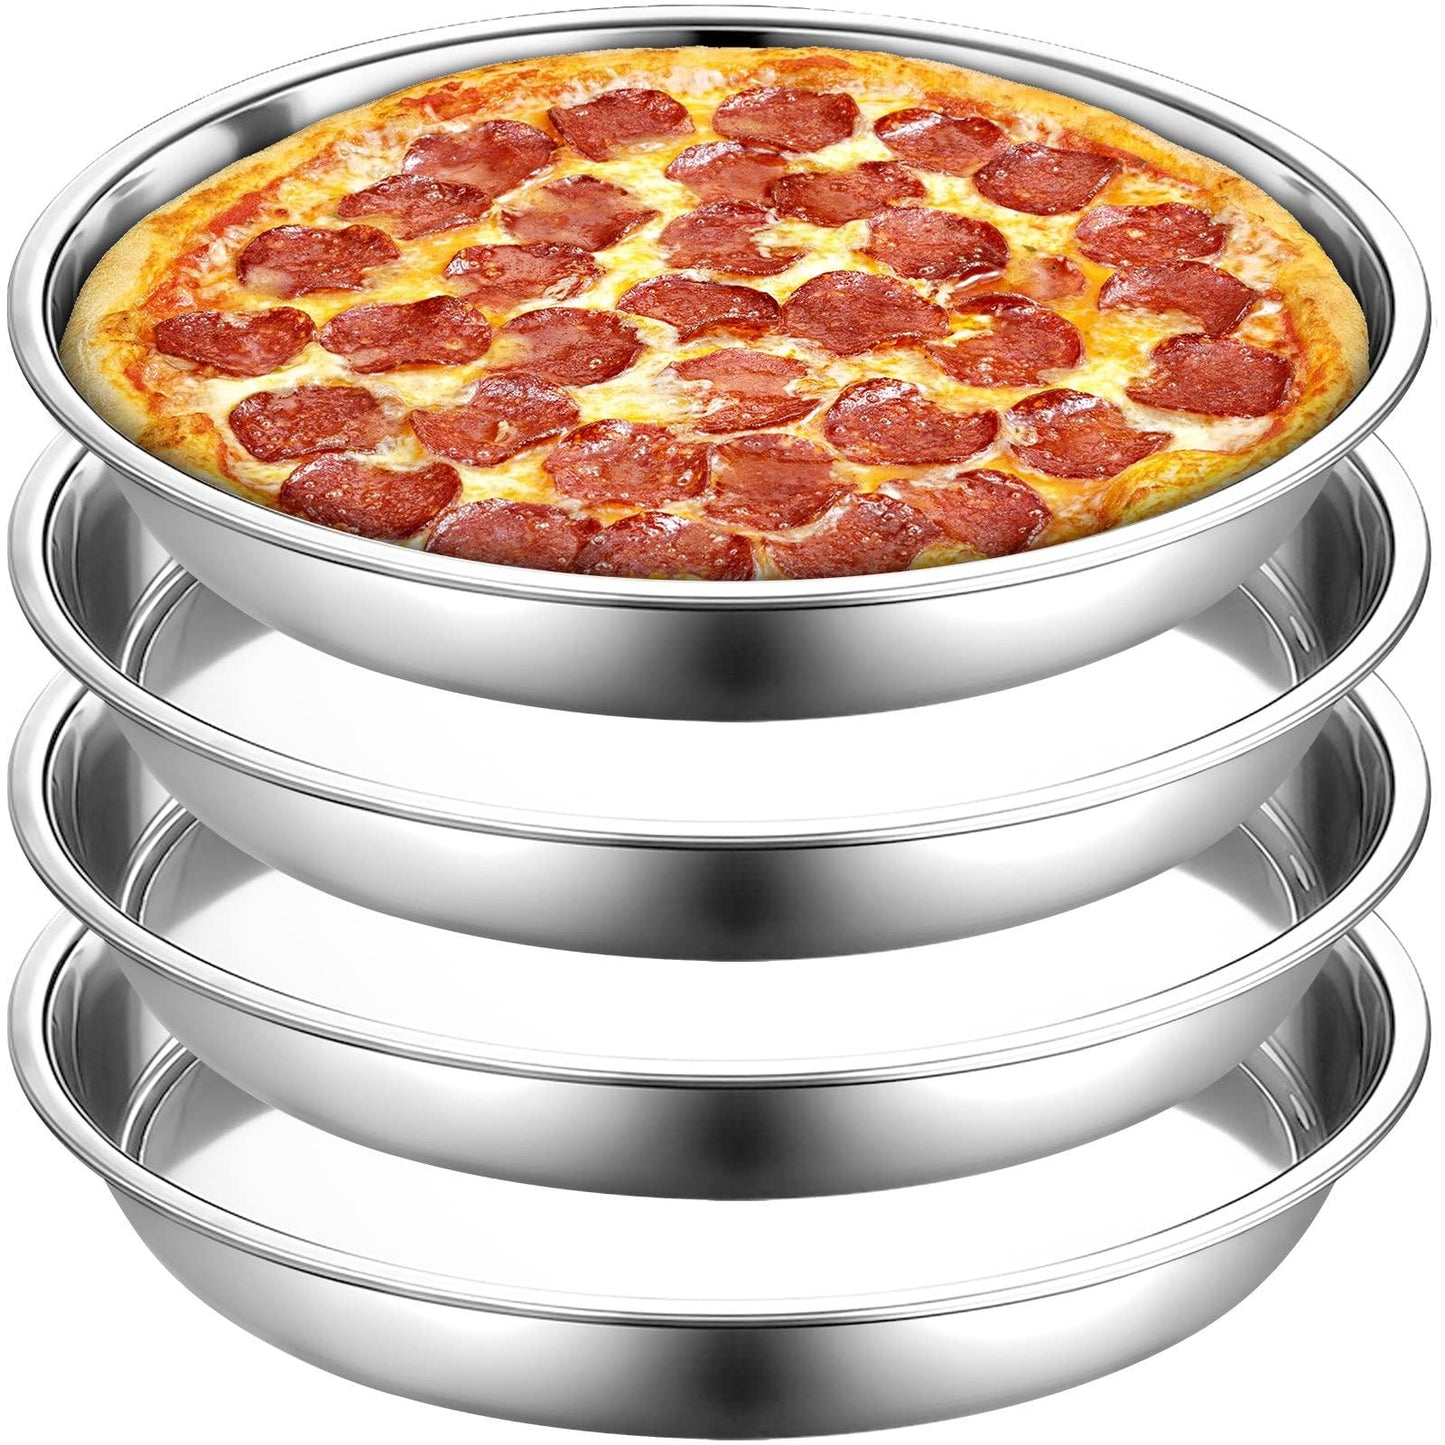 Elsjoy 4 Pack 13 Inch Stainless Steel Pizza Pan, Deep Round Baking Pan Large Pizza Baking Tray, Heavy-Duty Pizza Dish Non-Stick Baking Sheet for Oven, Dishwasher Safe - CookCave